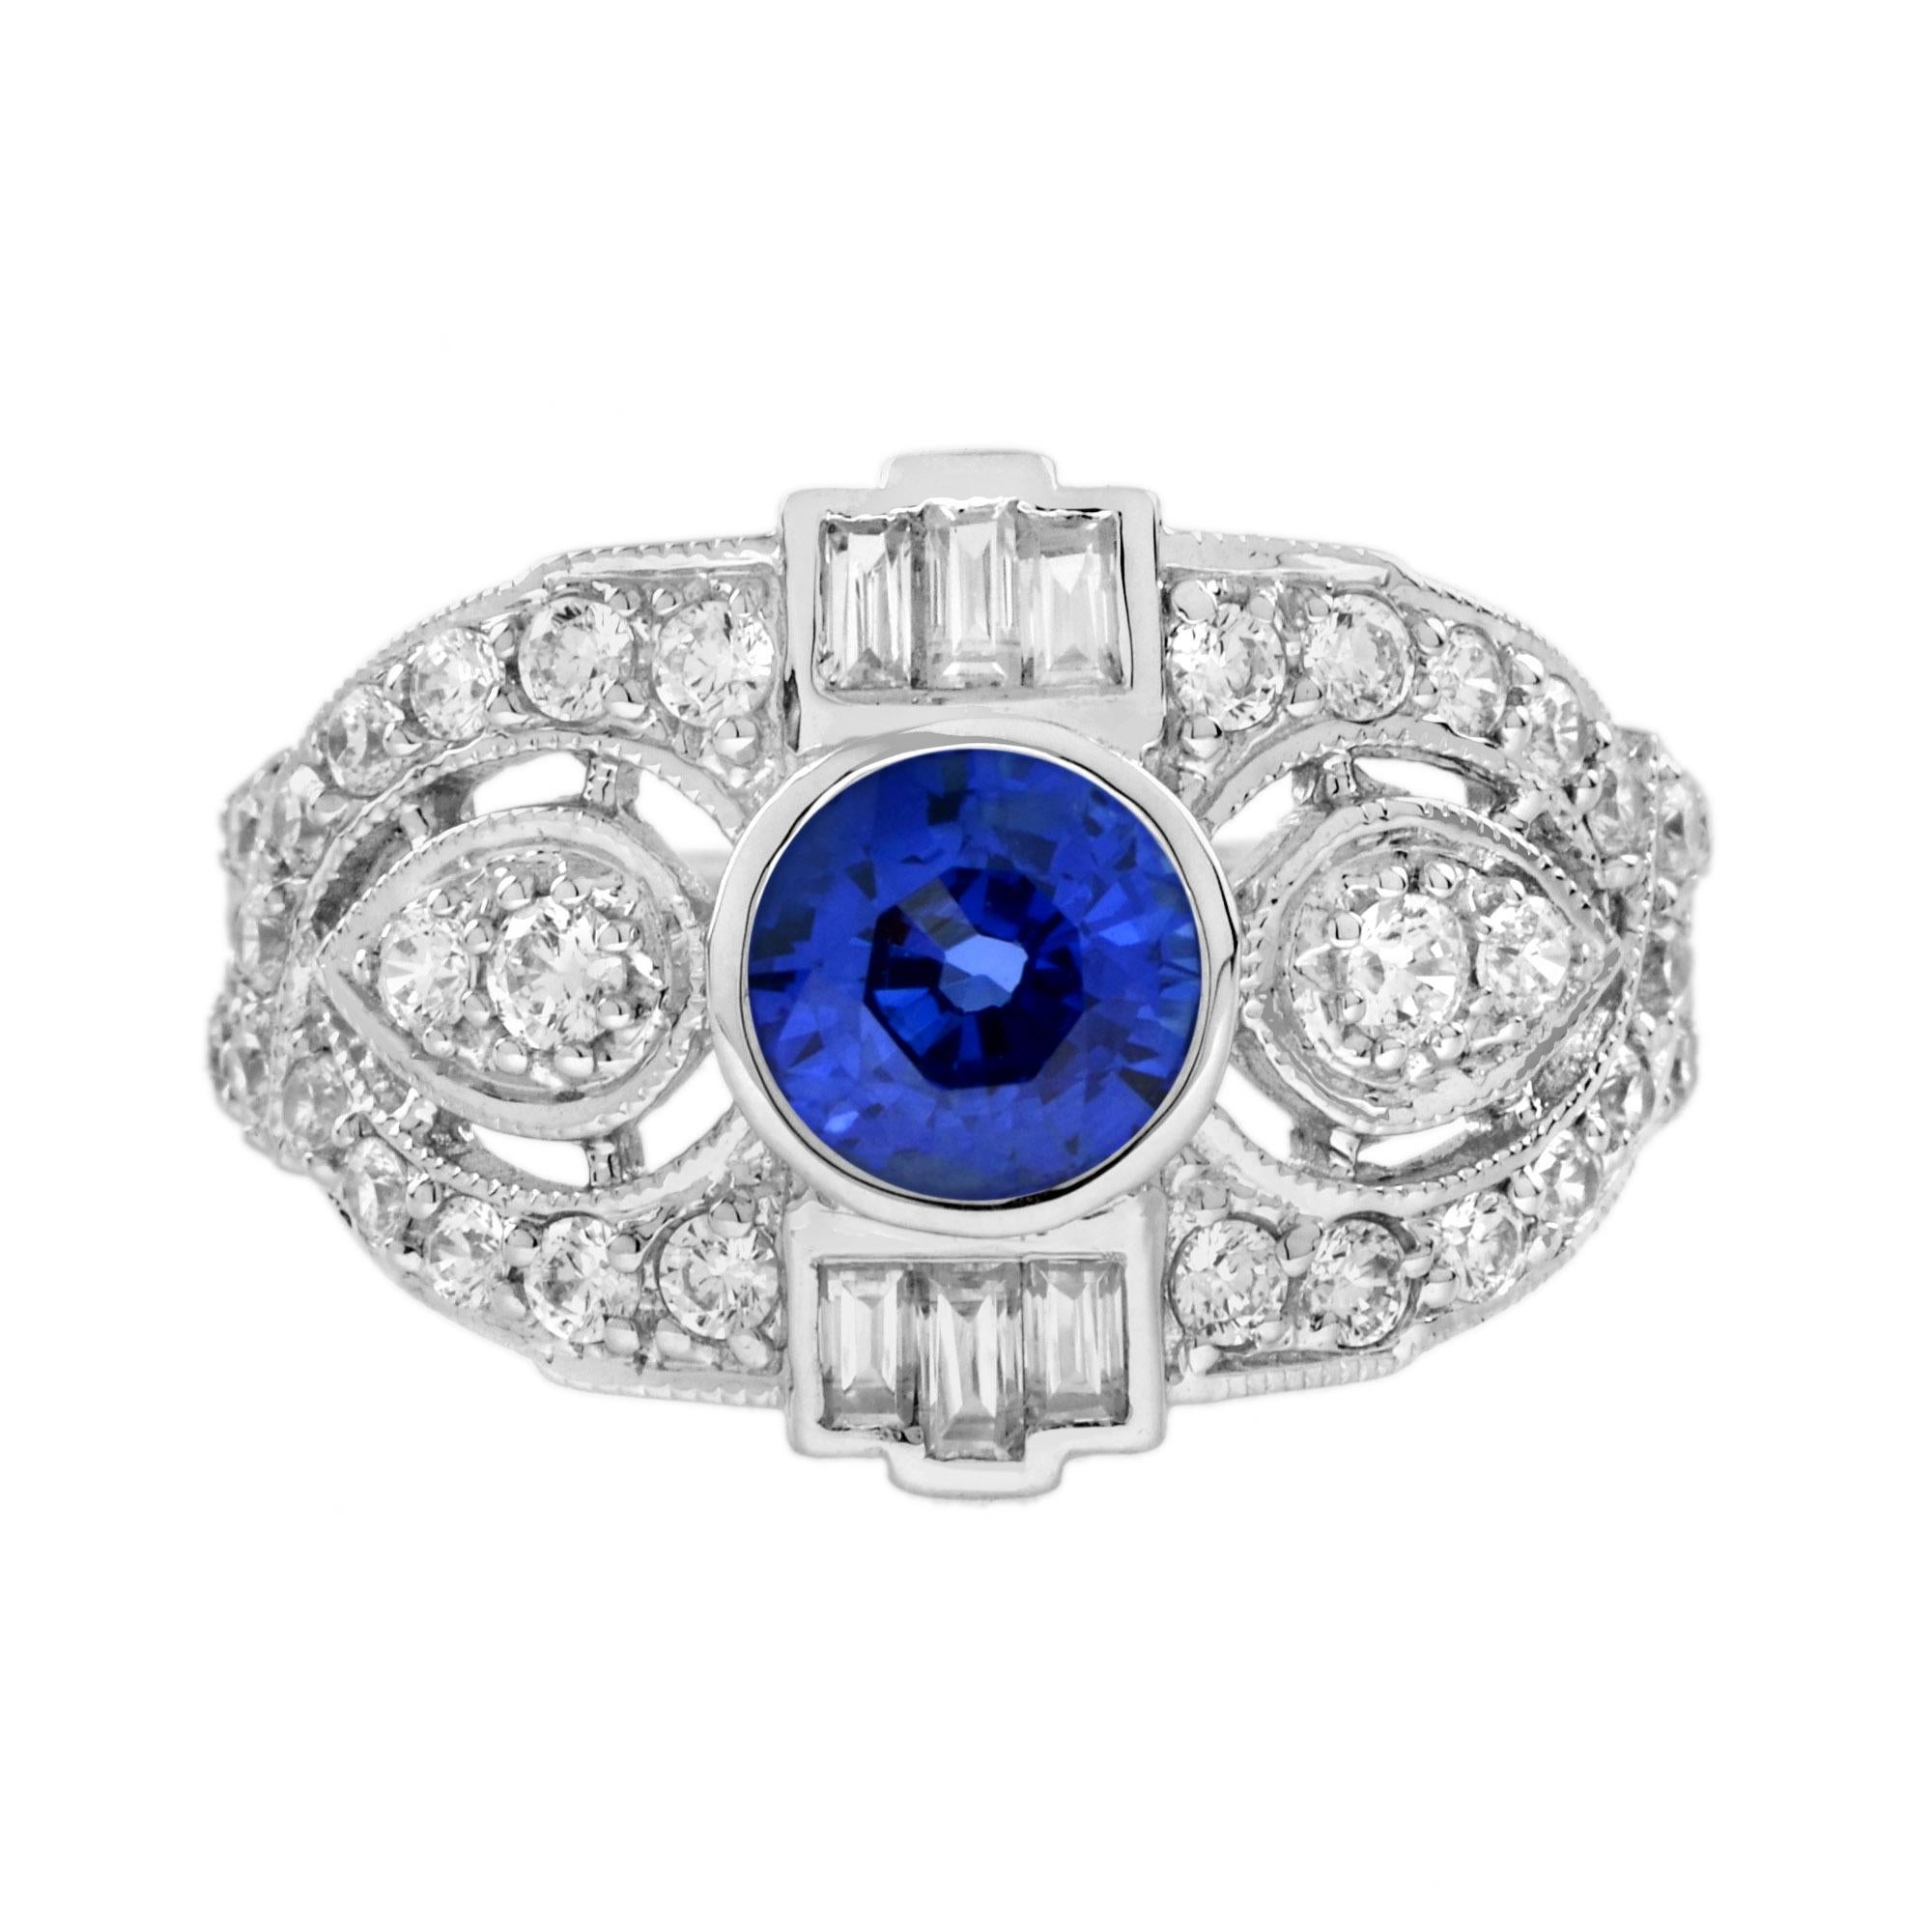 For Sale:  Ceylon Sapphire and Diamond Art Deco Style Engagement Ring in 18K White Gold